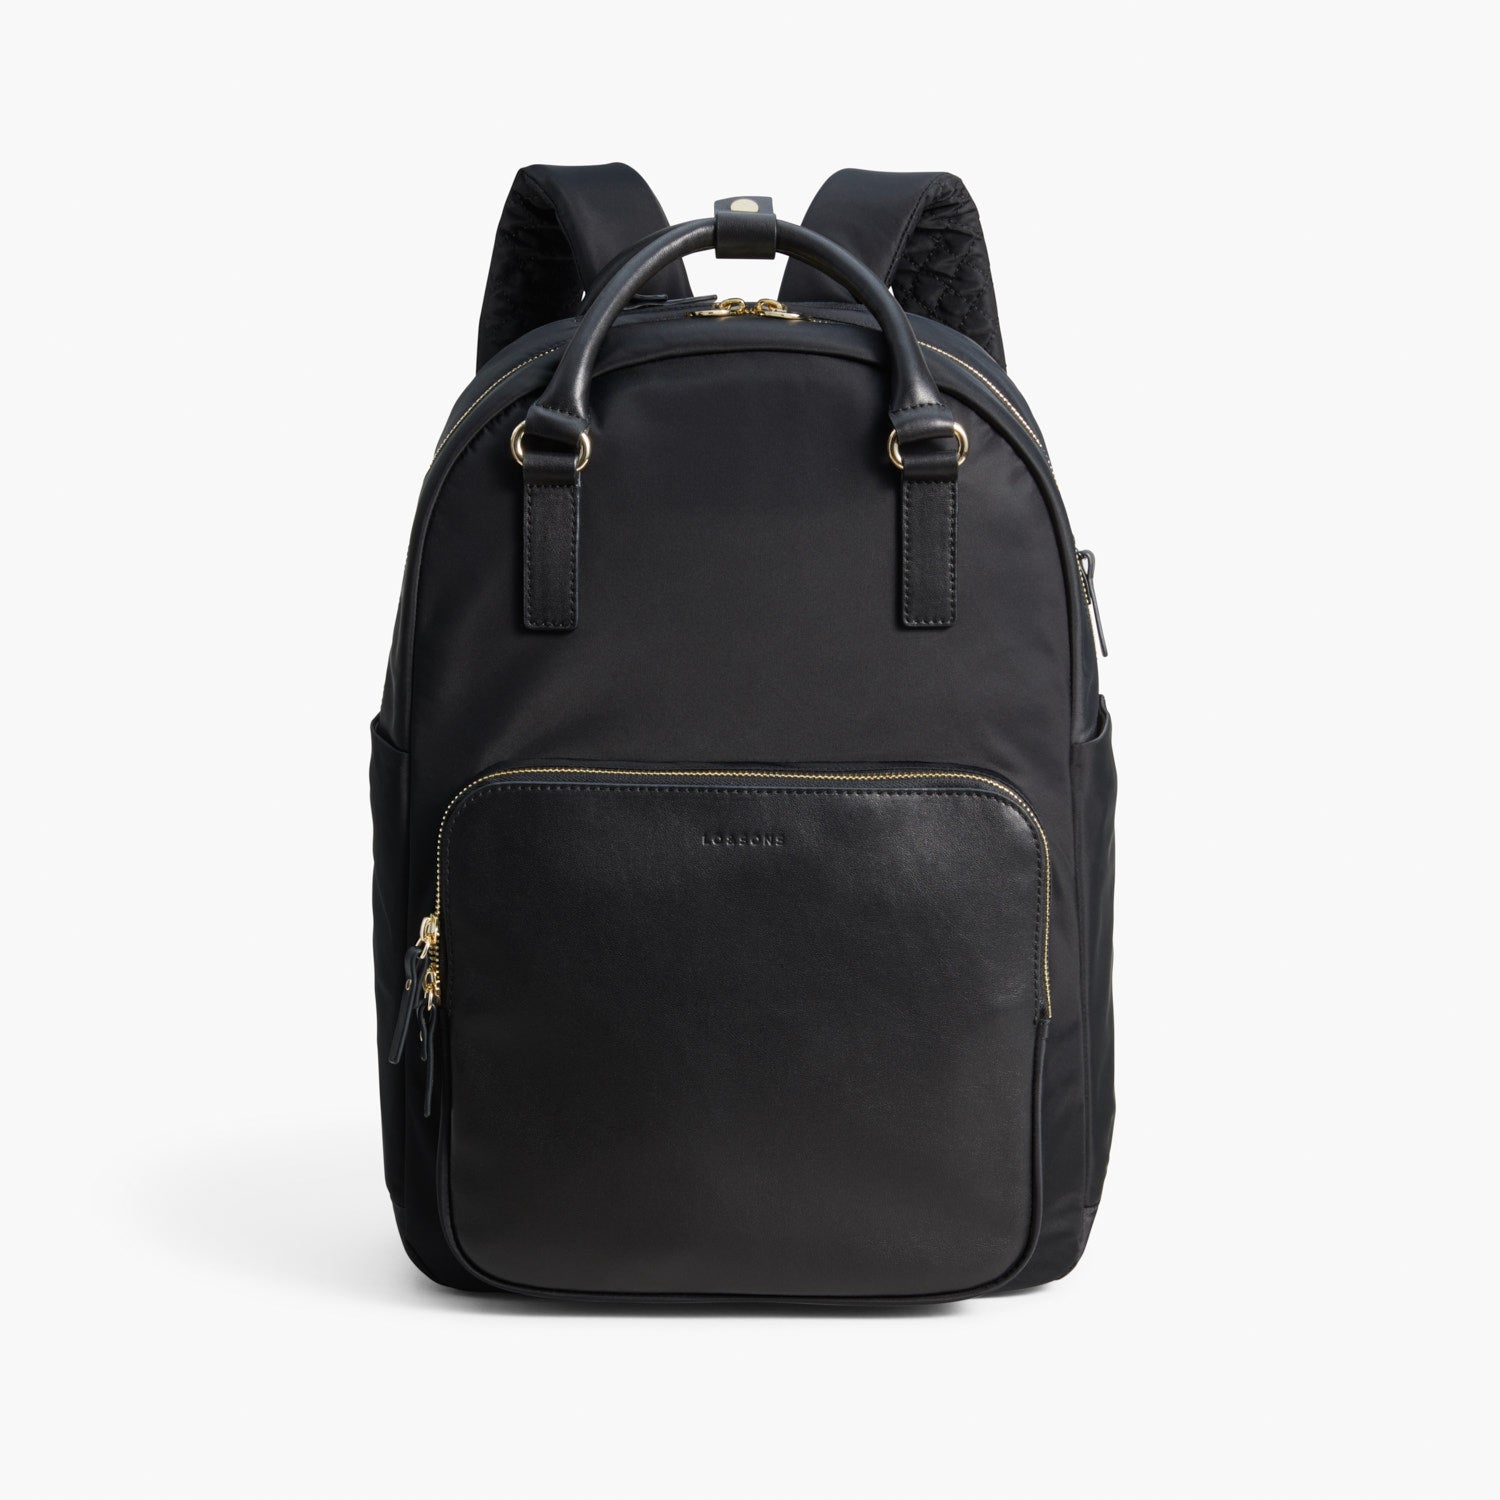 Lo & Sons: The Rowledge - Women's Nylon Laptop Backpack in Black/Gold/Lavender (Small)